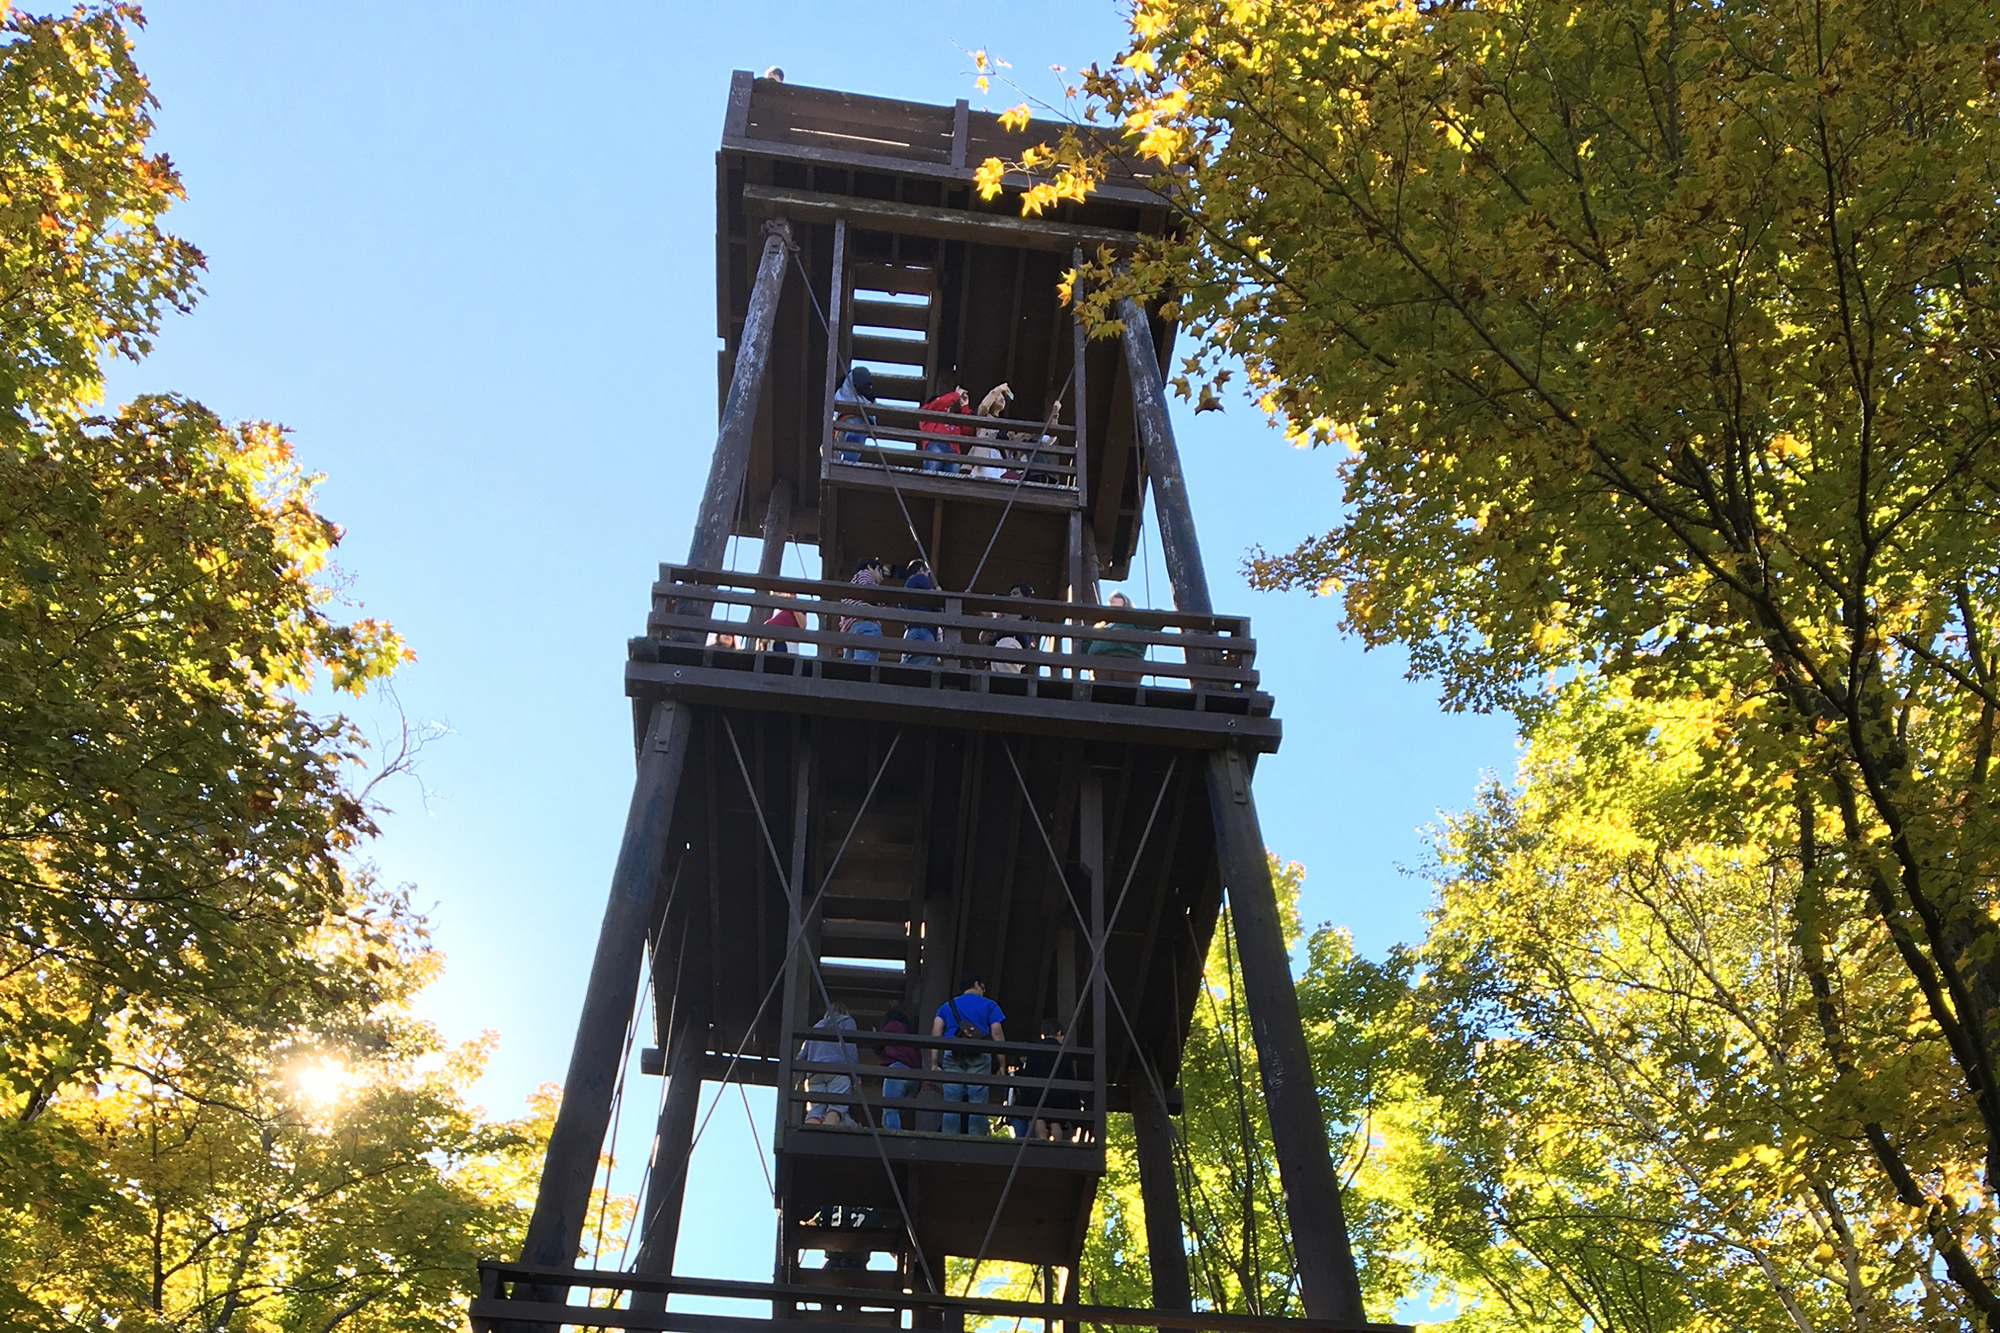 The Potawatomi State Park observation tower